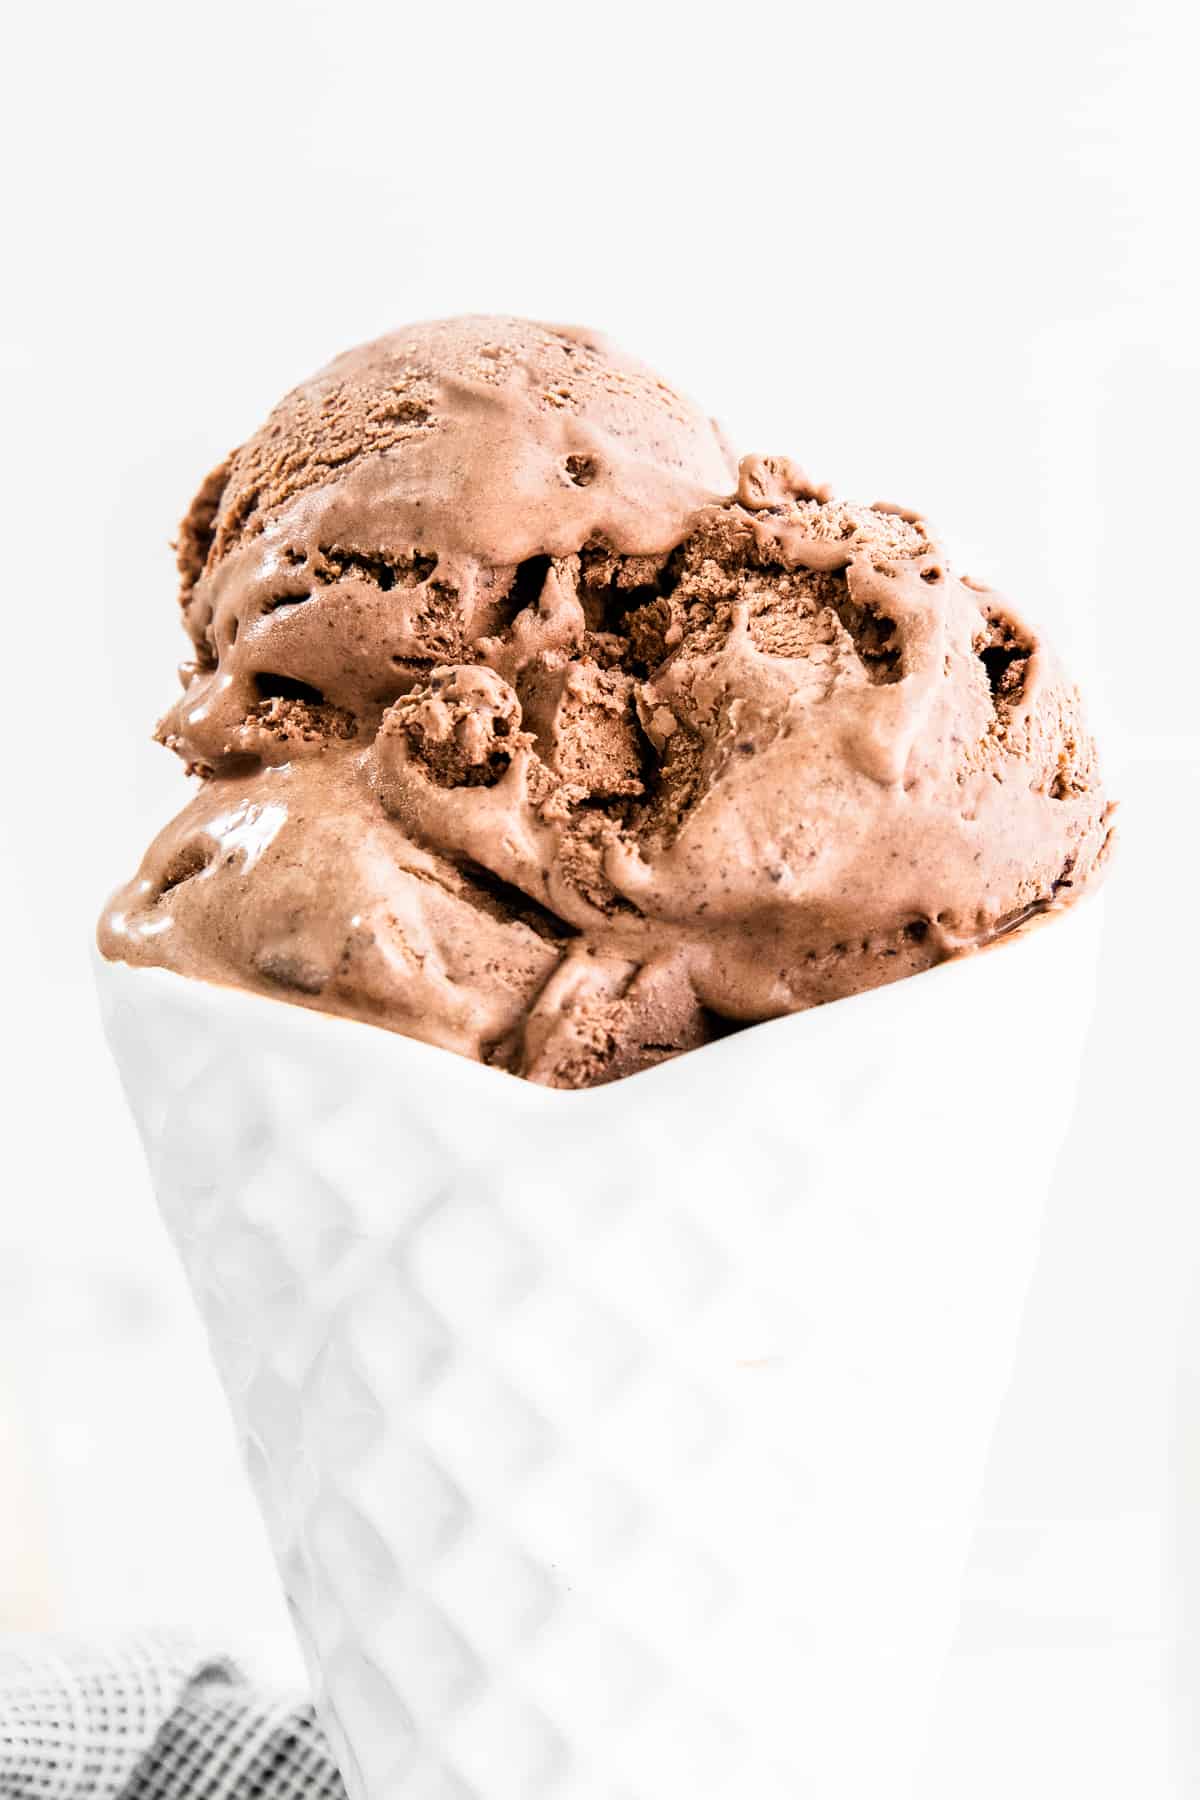 Rich and creamy no-churn chocolate ice cream in white bowl shaped like an ice cream cone